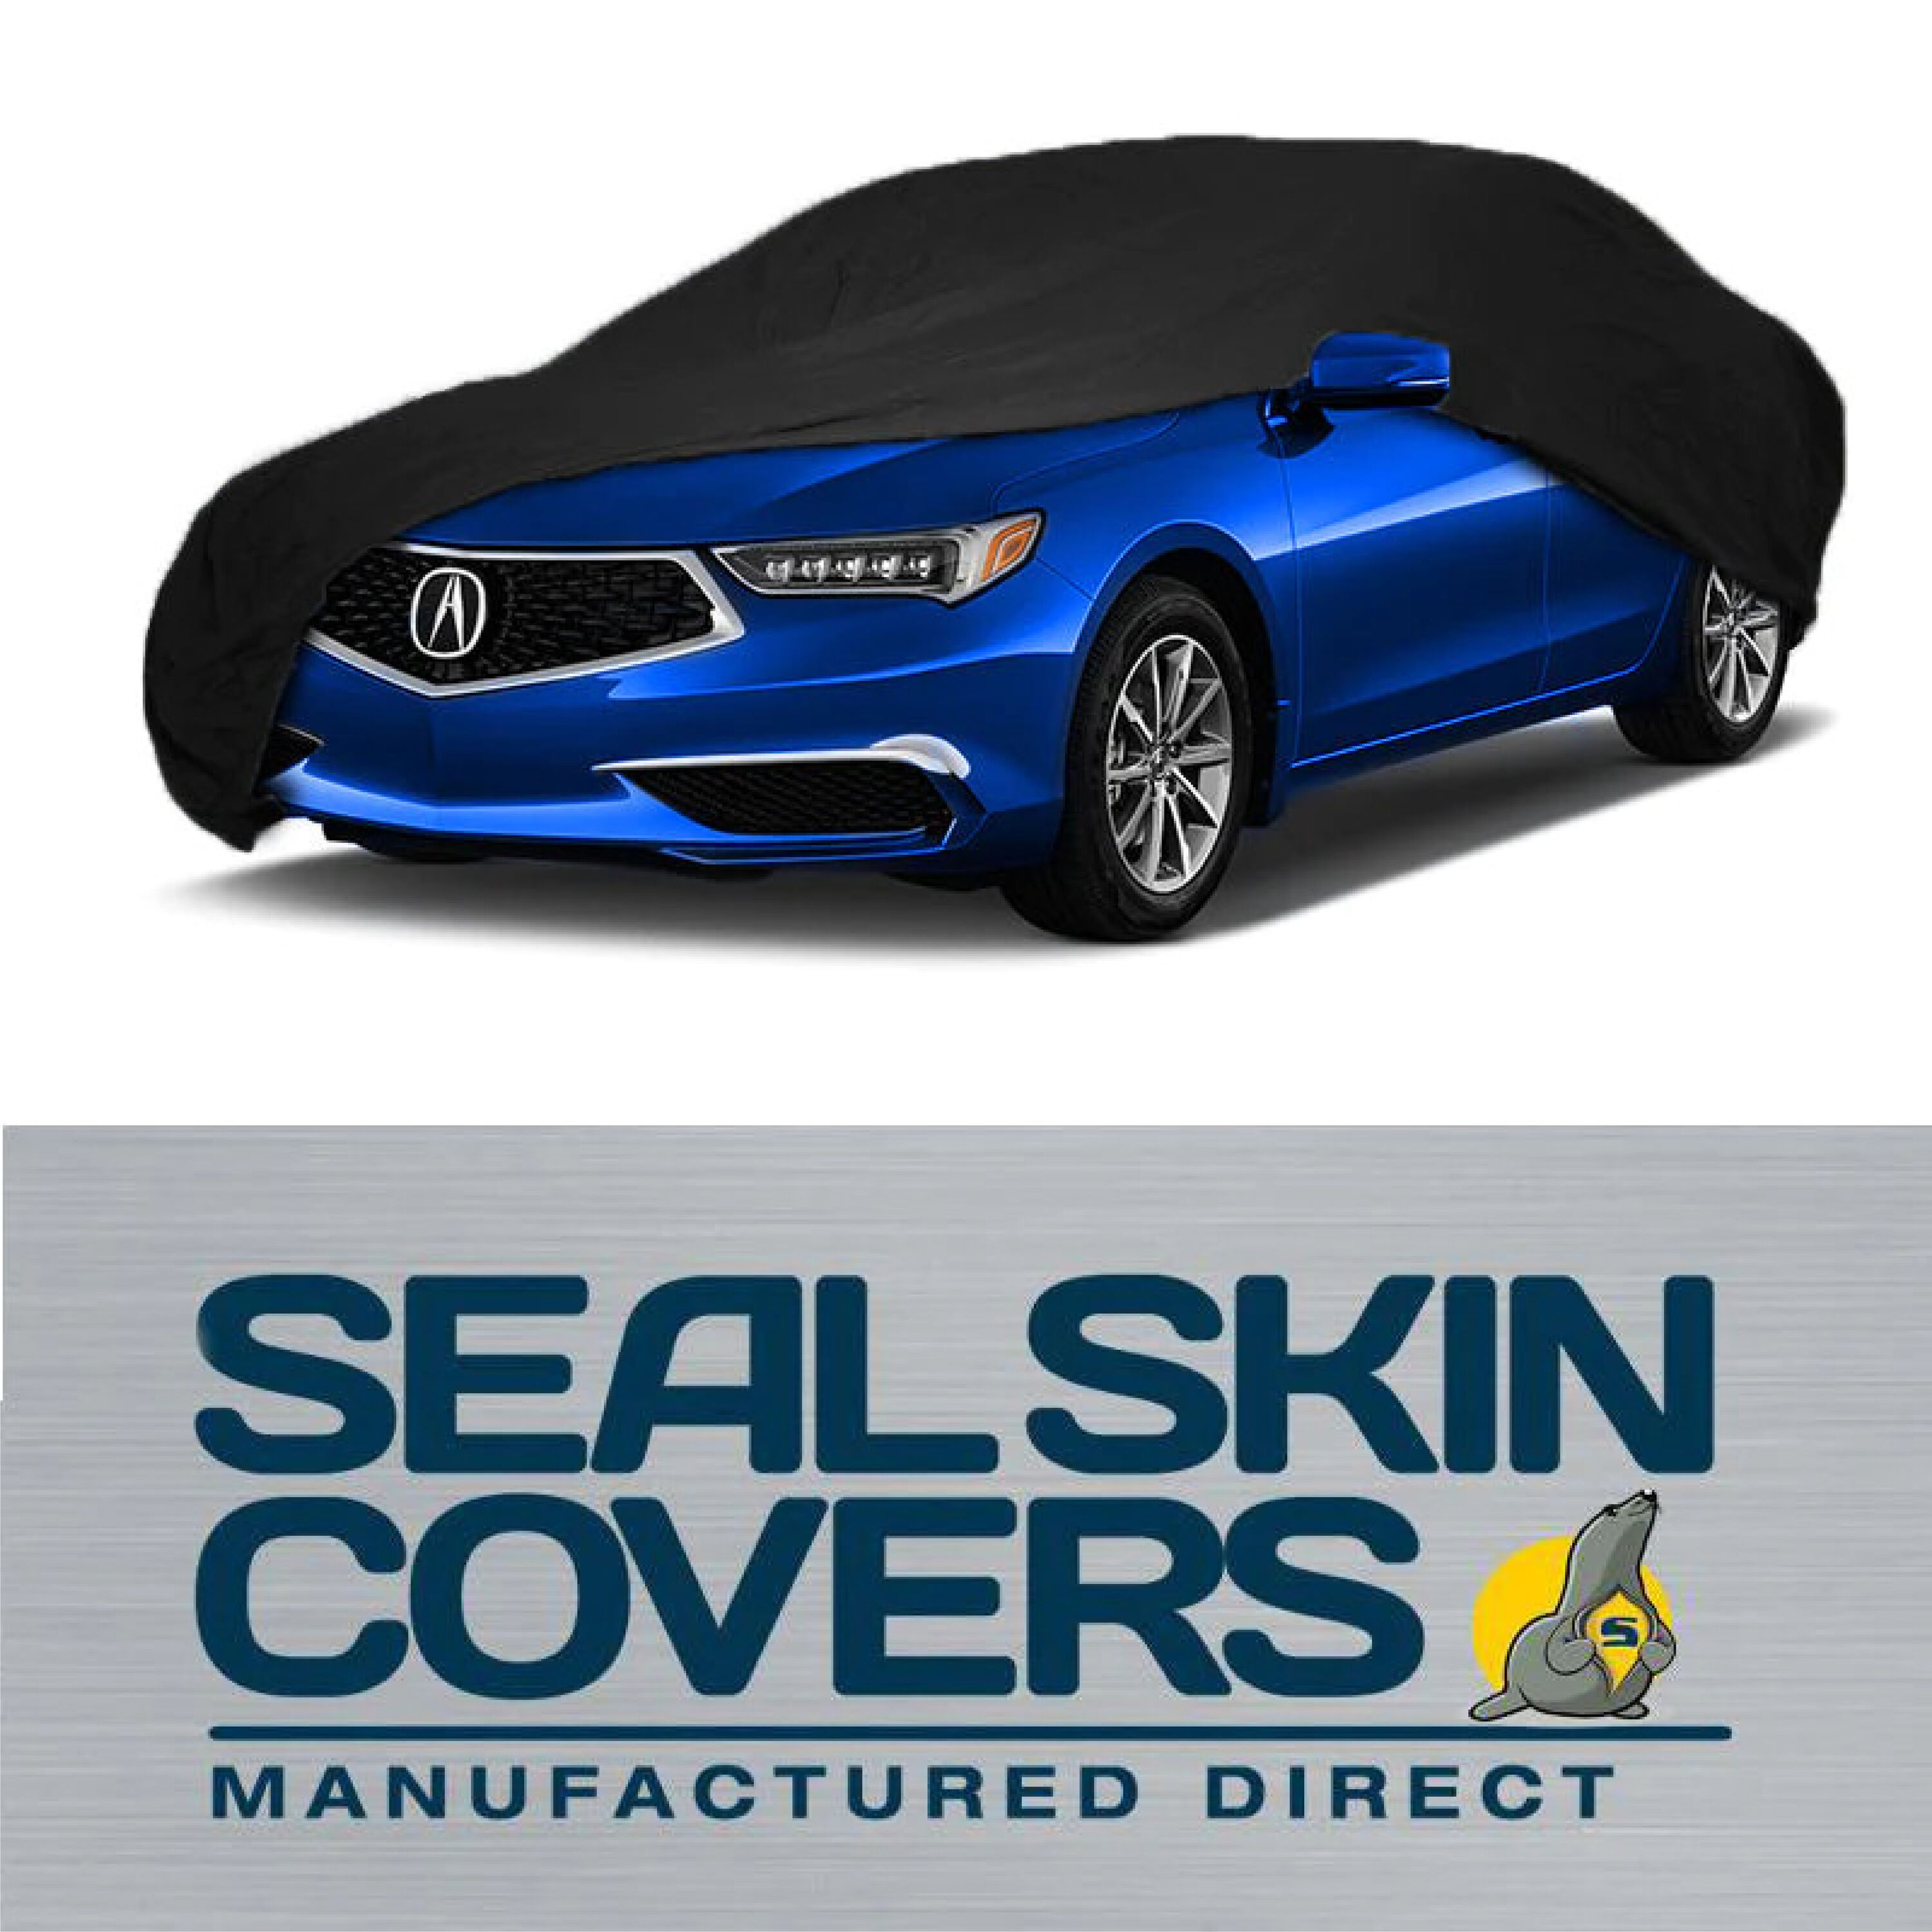 Seal Skin Covers Waterproof Indoor/Outdoor Universal Car Cover for Compact  Cars - Black, Lining, SEAL-TEC Technology in the Universal Car Covers  department at